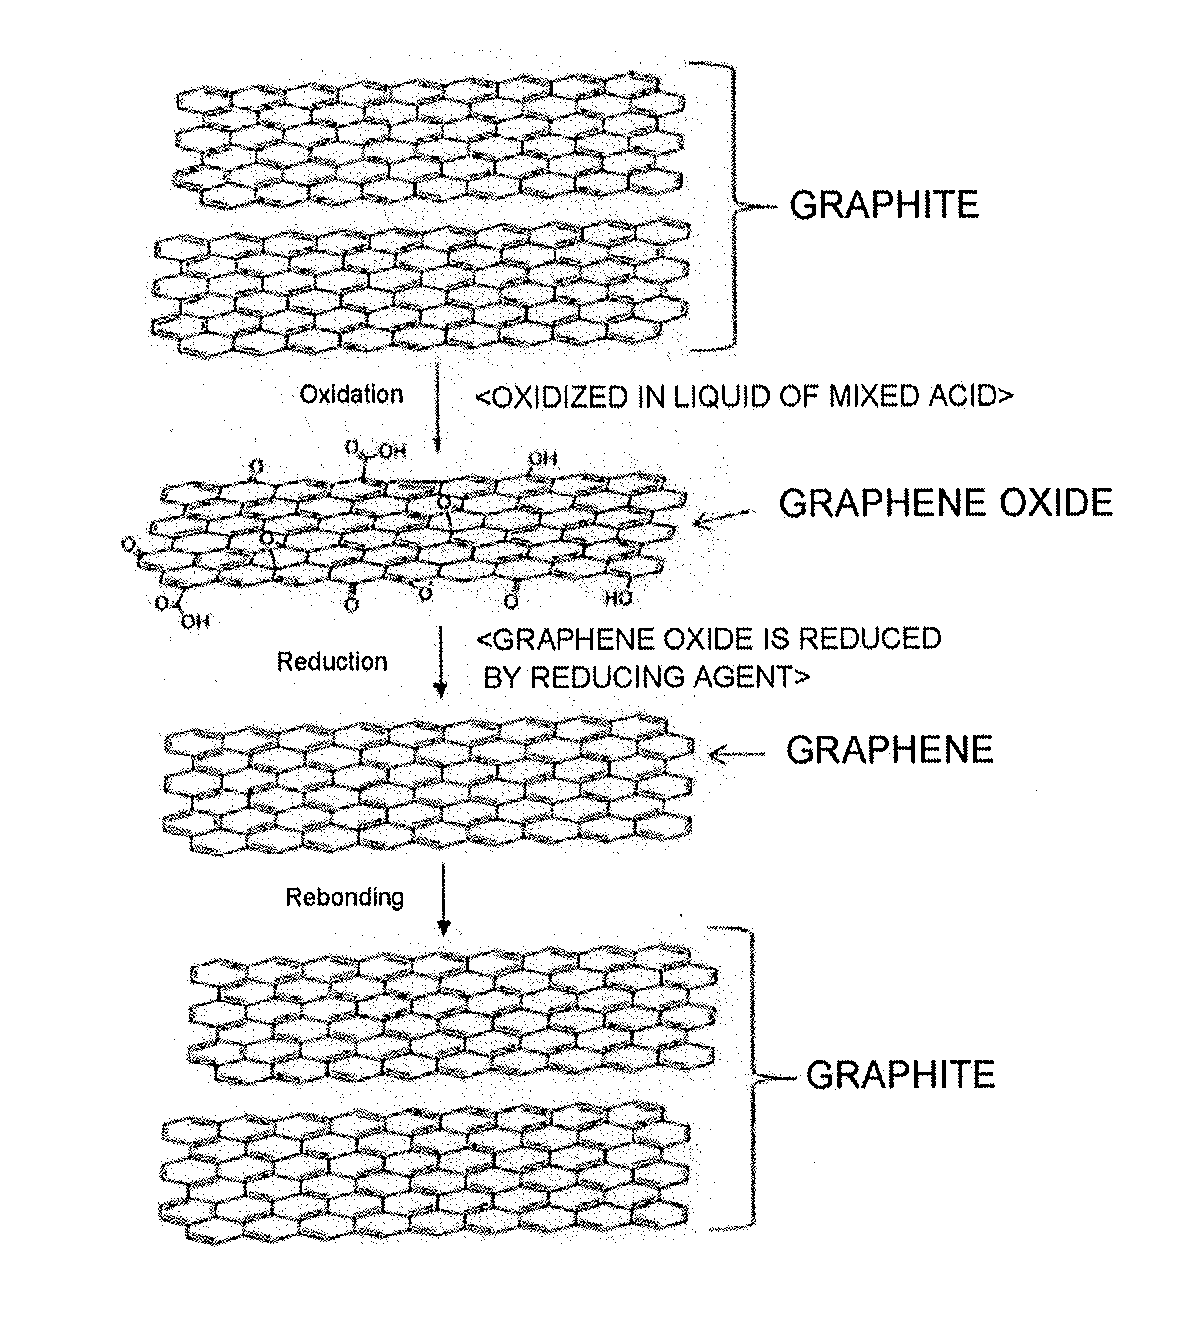 Linked stacks of partly reduced graphene, method for producing linked stacks of partly reduced graphene, powder comprising linked stacks of partly reduced graphene, film comprising linked stacks of partly reduced graphene, graphene electrode film, method for producing graphene electrode film, and graphene capacitor